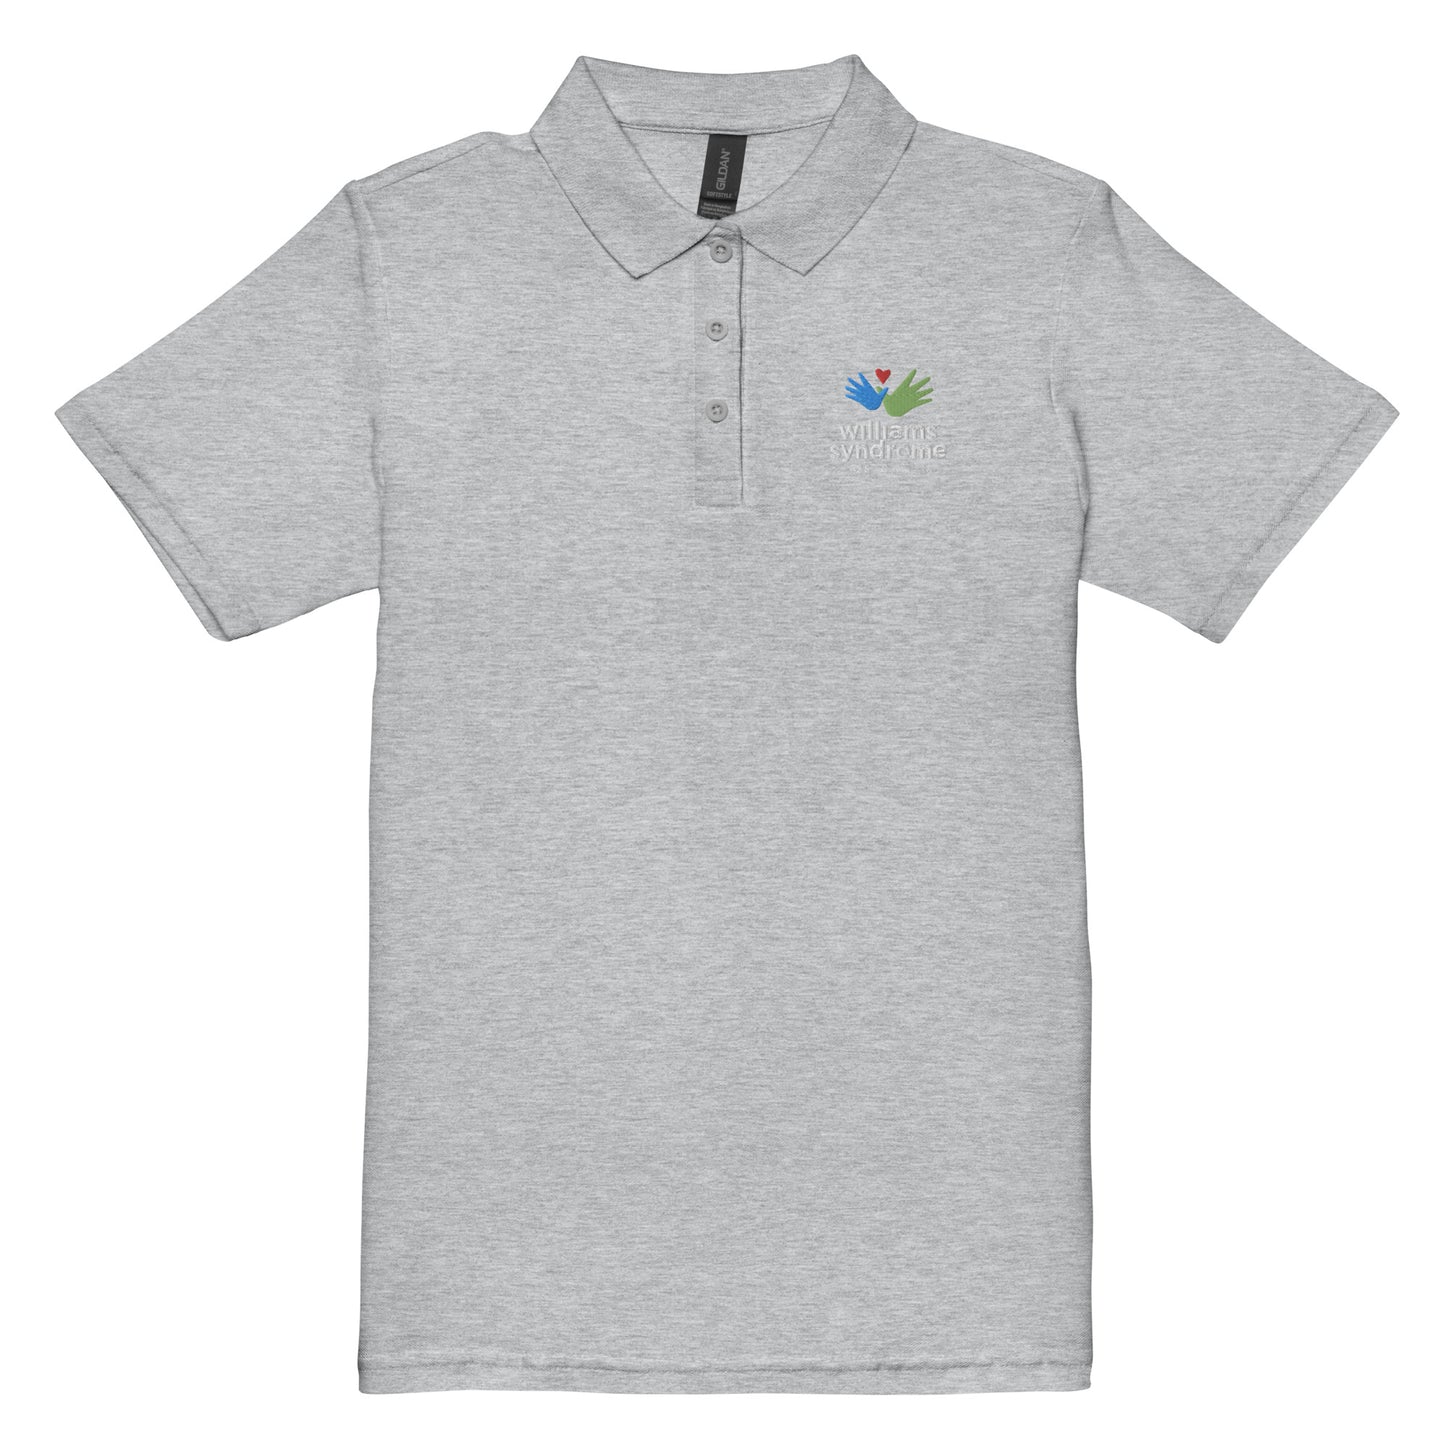 Williams Syndrome Association — Women’s Pique Polo Shirt (embroidered)